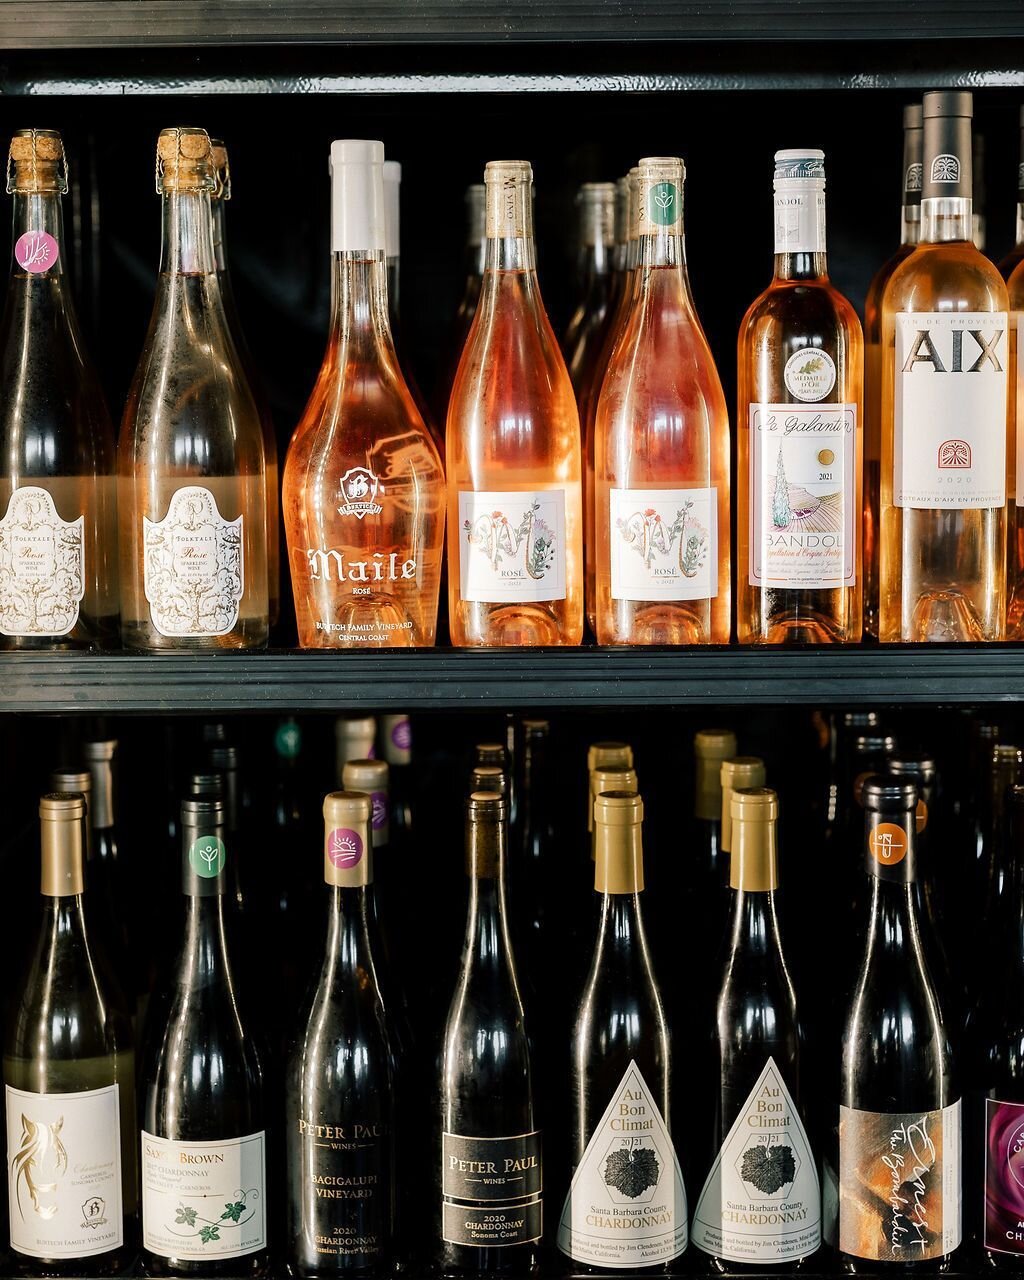 If the walls of MRKT SPACE could talk, they would tell you it&rsquo;s time for a drink. We carry a small, but spectacular selection of wine from local and international producers. ✨ Gone are the days of standing in a never-ending aisle, staring at a 